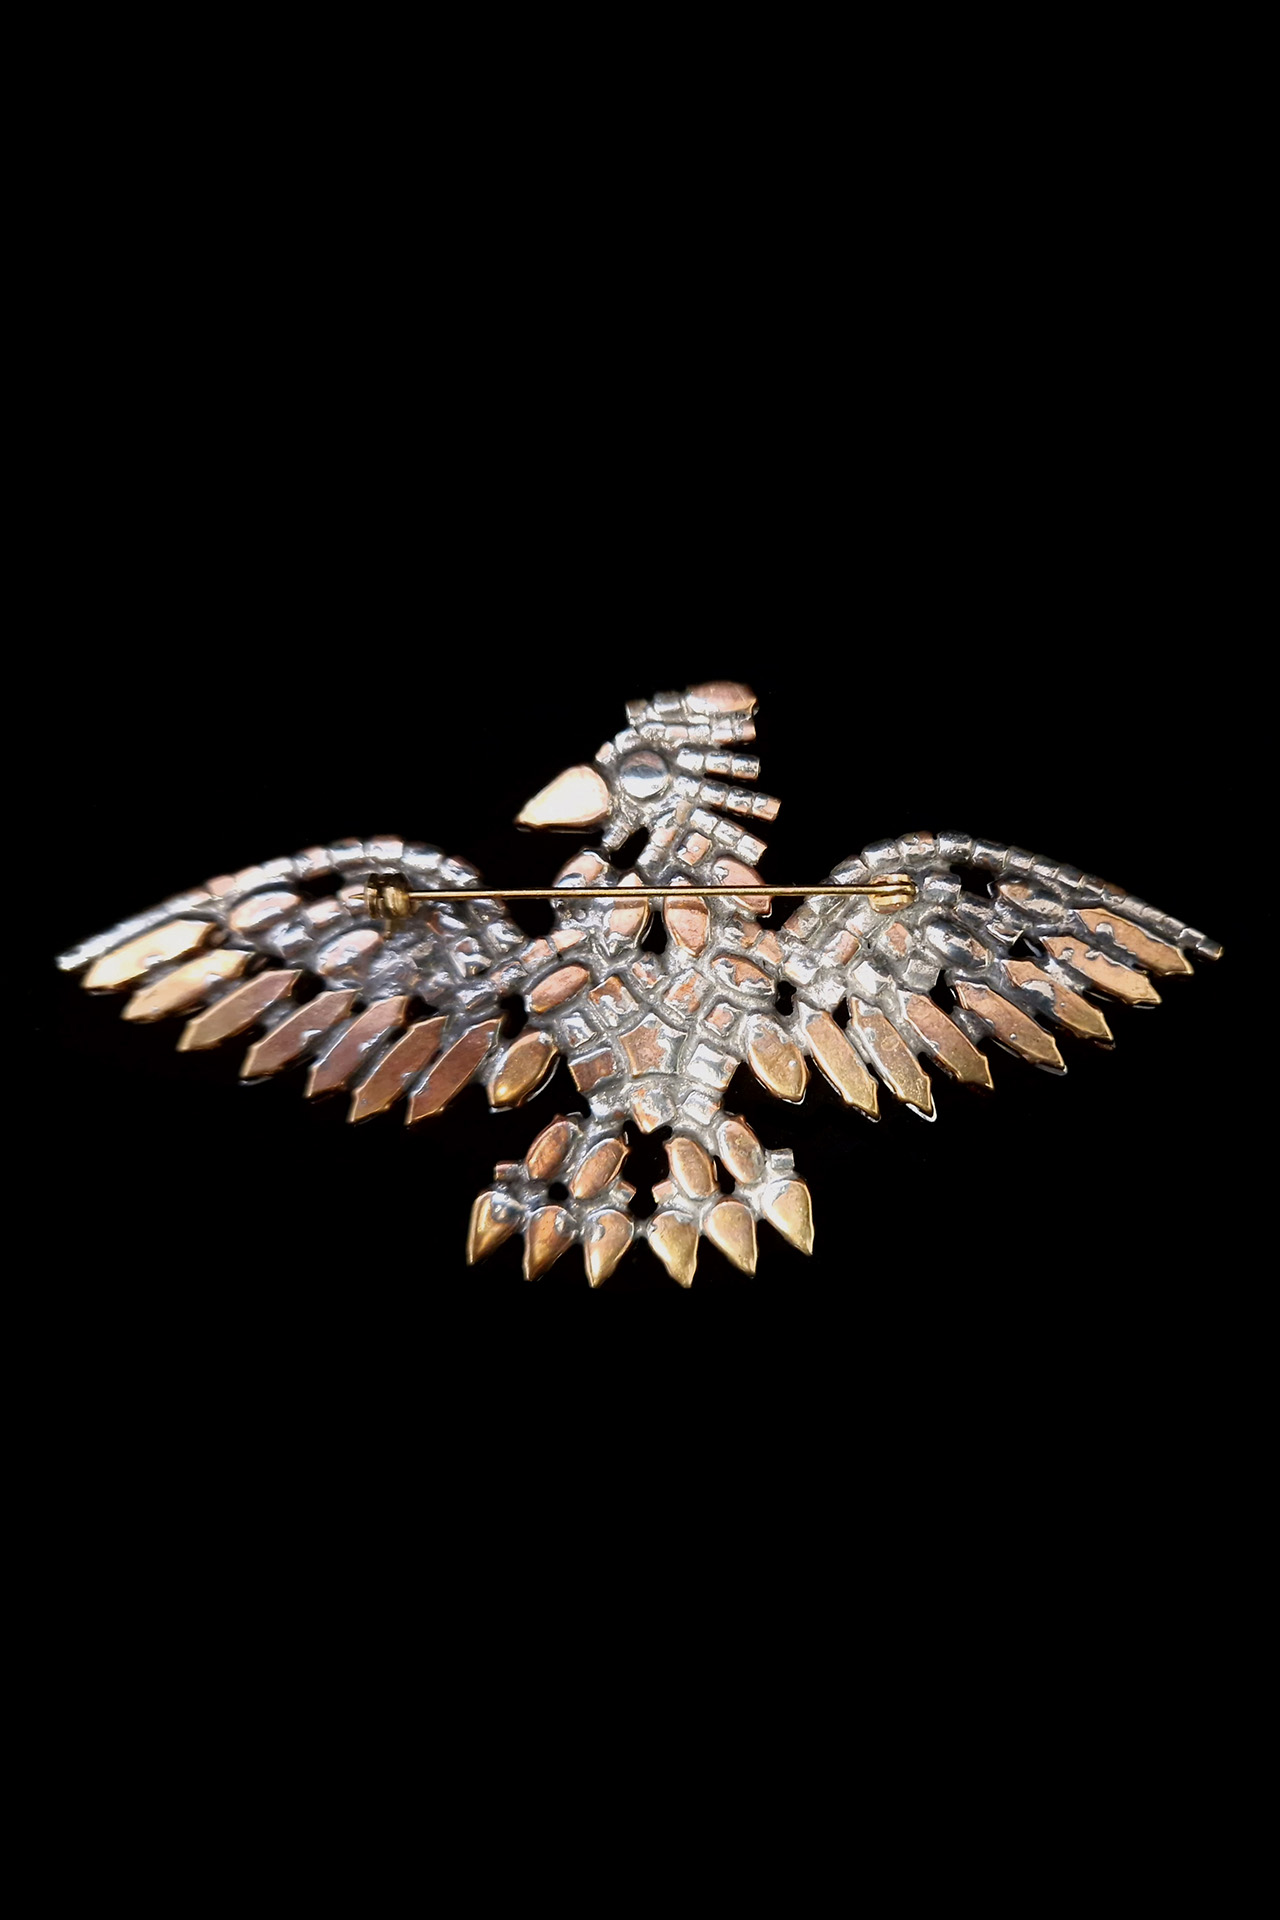 Handcrafted decorative brooch with US eagle